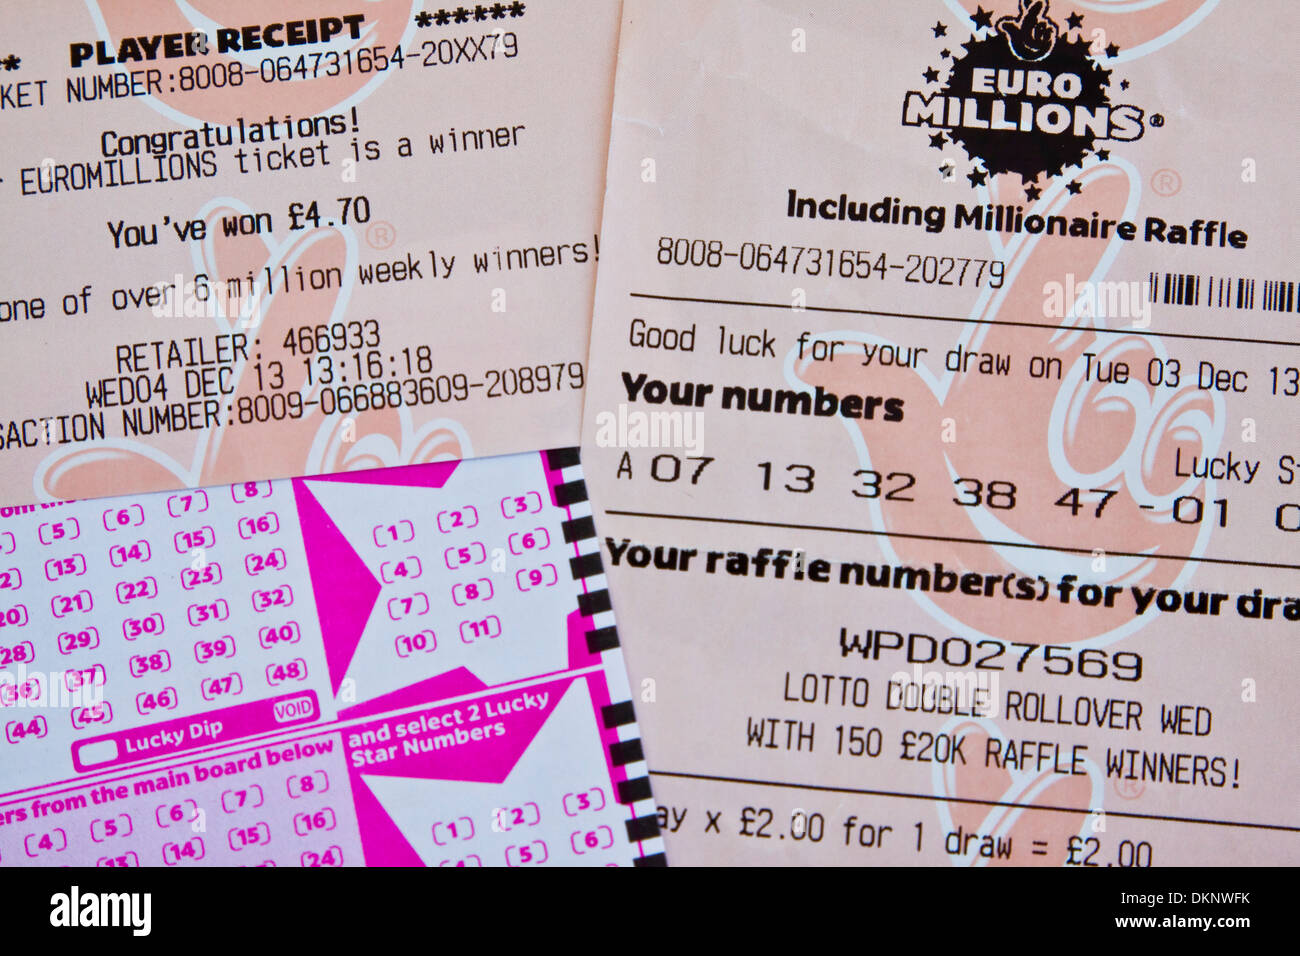 National lottery euro millions ticket, game slip and winning receipt Stock  Photo - Alamy